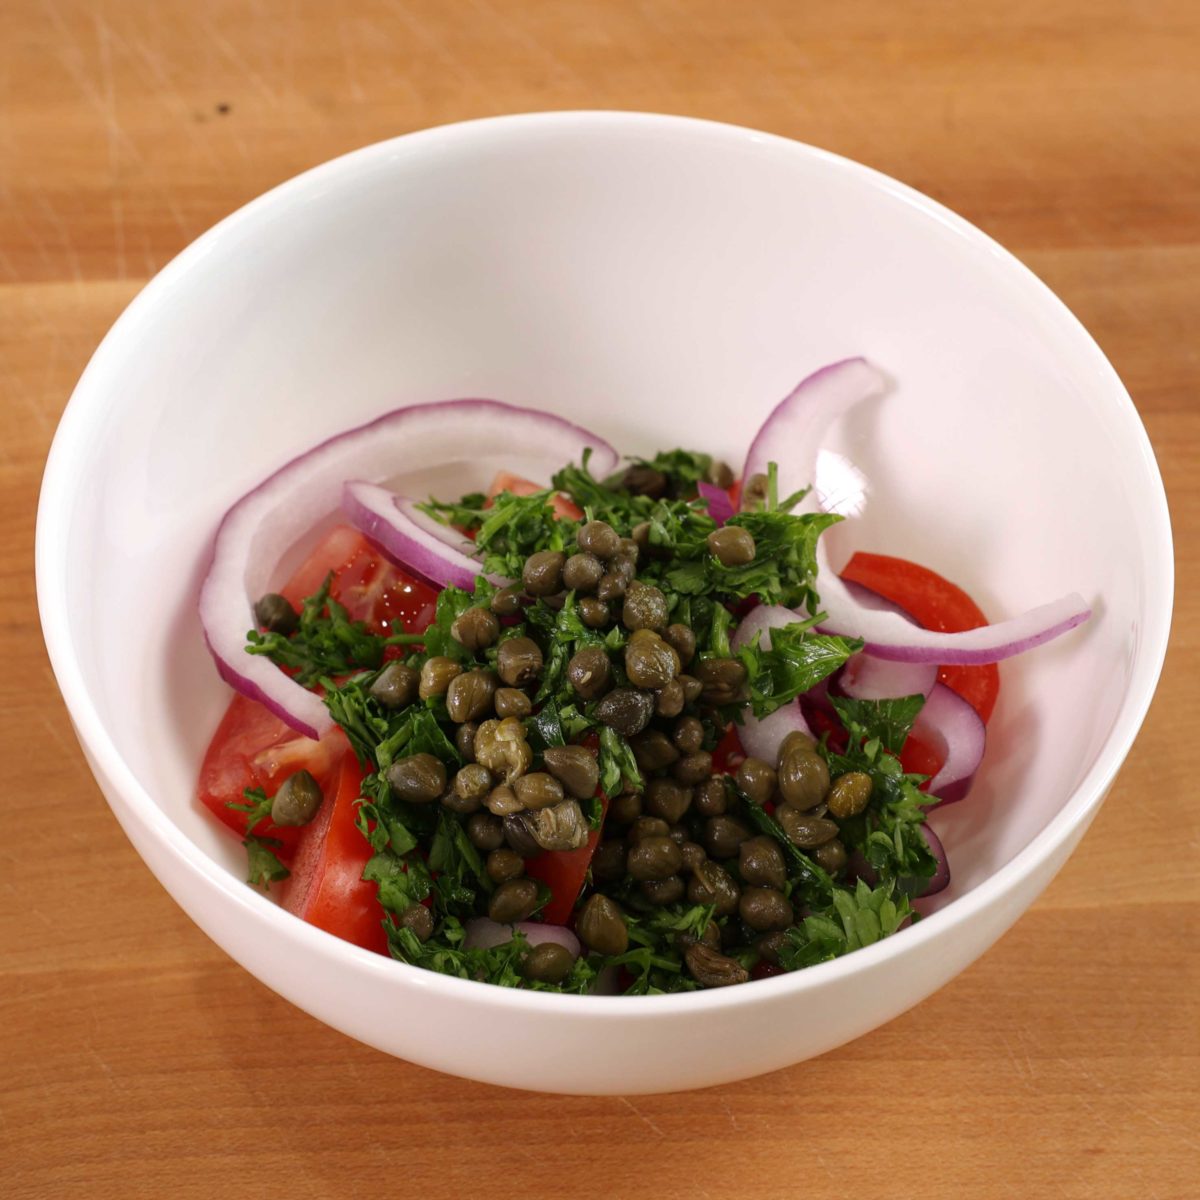 a white bowl filled with capers, tomatoes, red onion slices, and parsley on a brown wooden table.